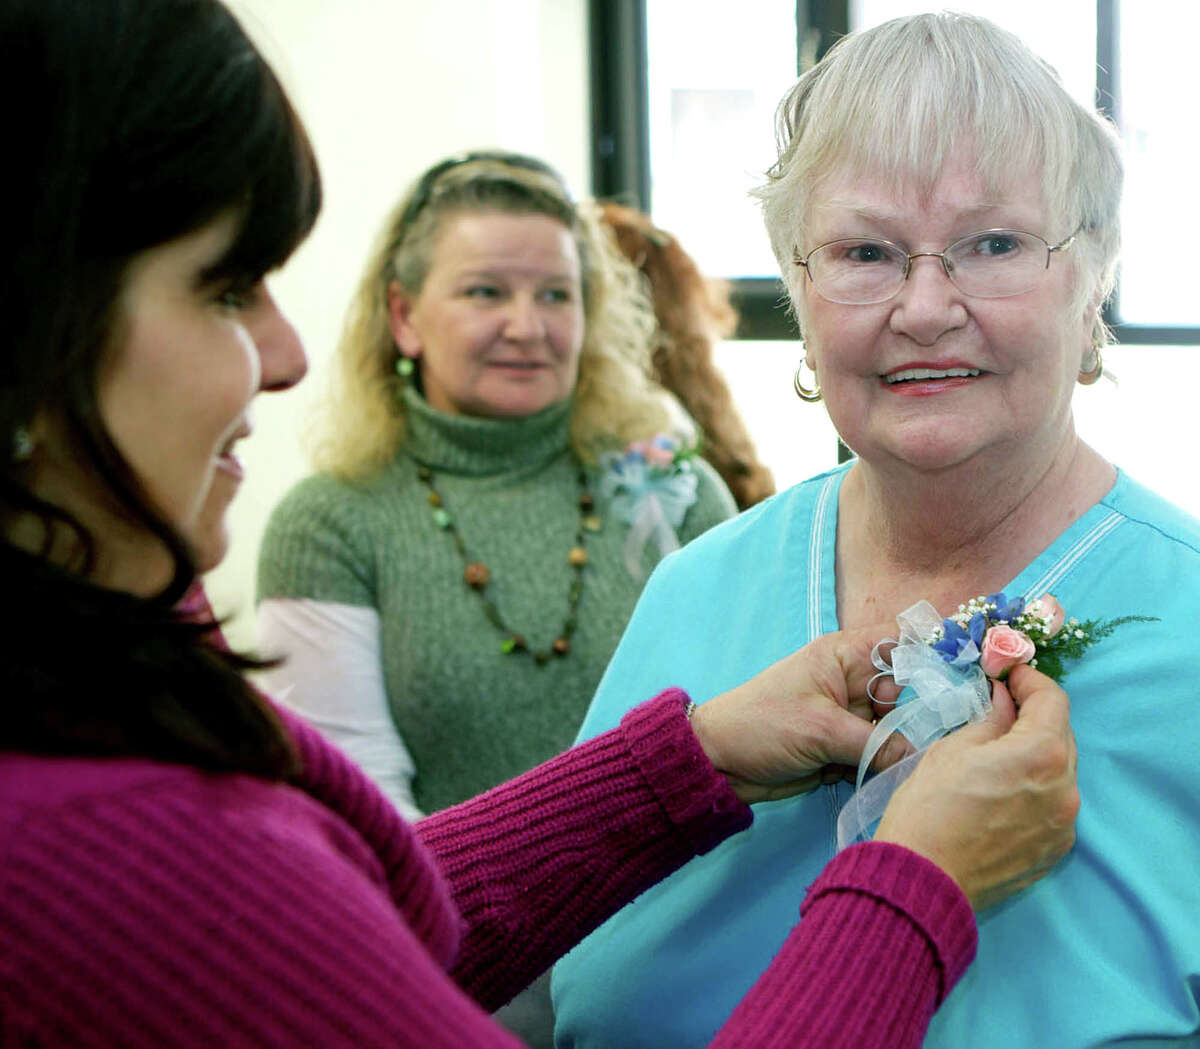 Lisa Smith, director of patient care services at New Milford Hospital, pins a corsage on registered nurse Carroll Linabury, who has been at the birthing center the longest of all staff members - 44 years. Linabury and other staff were honored March 21, 2013 for their work during a farewell party at the hospital, two days before the closing of the birthing center.